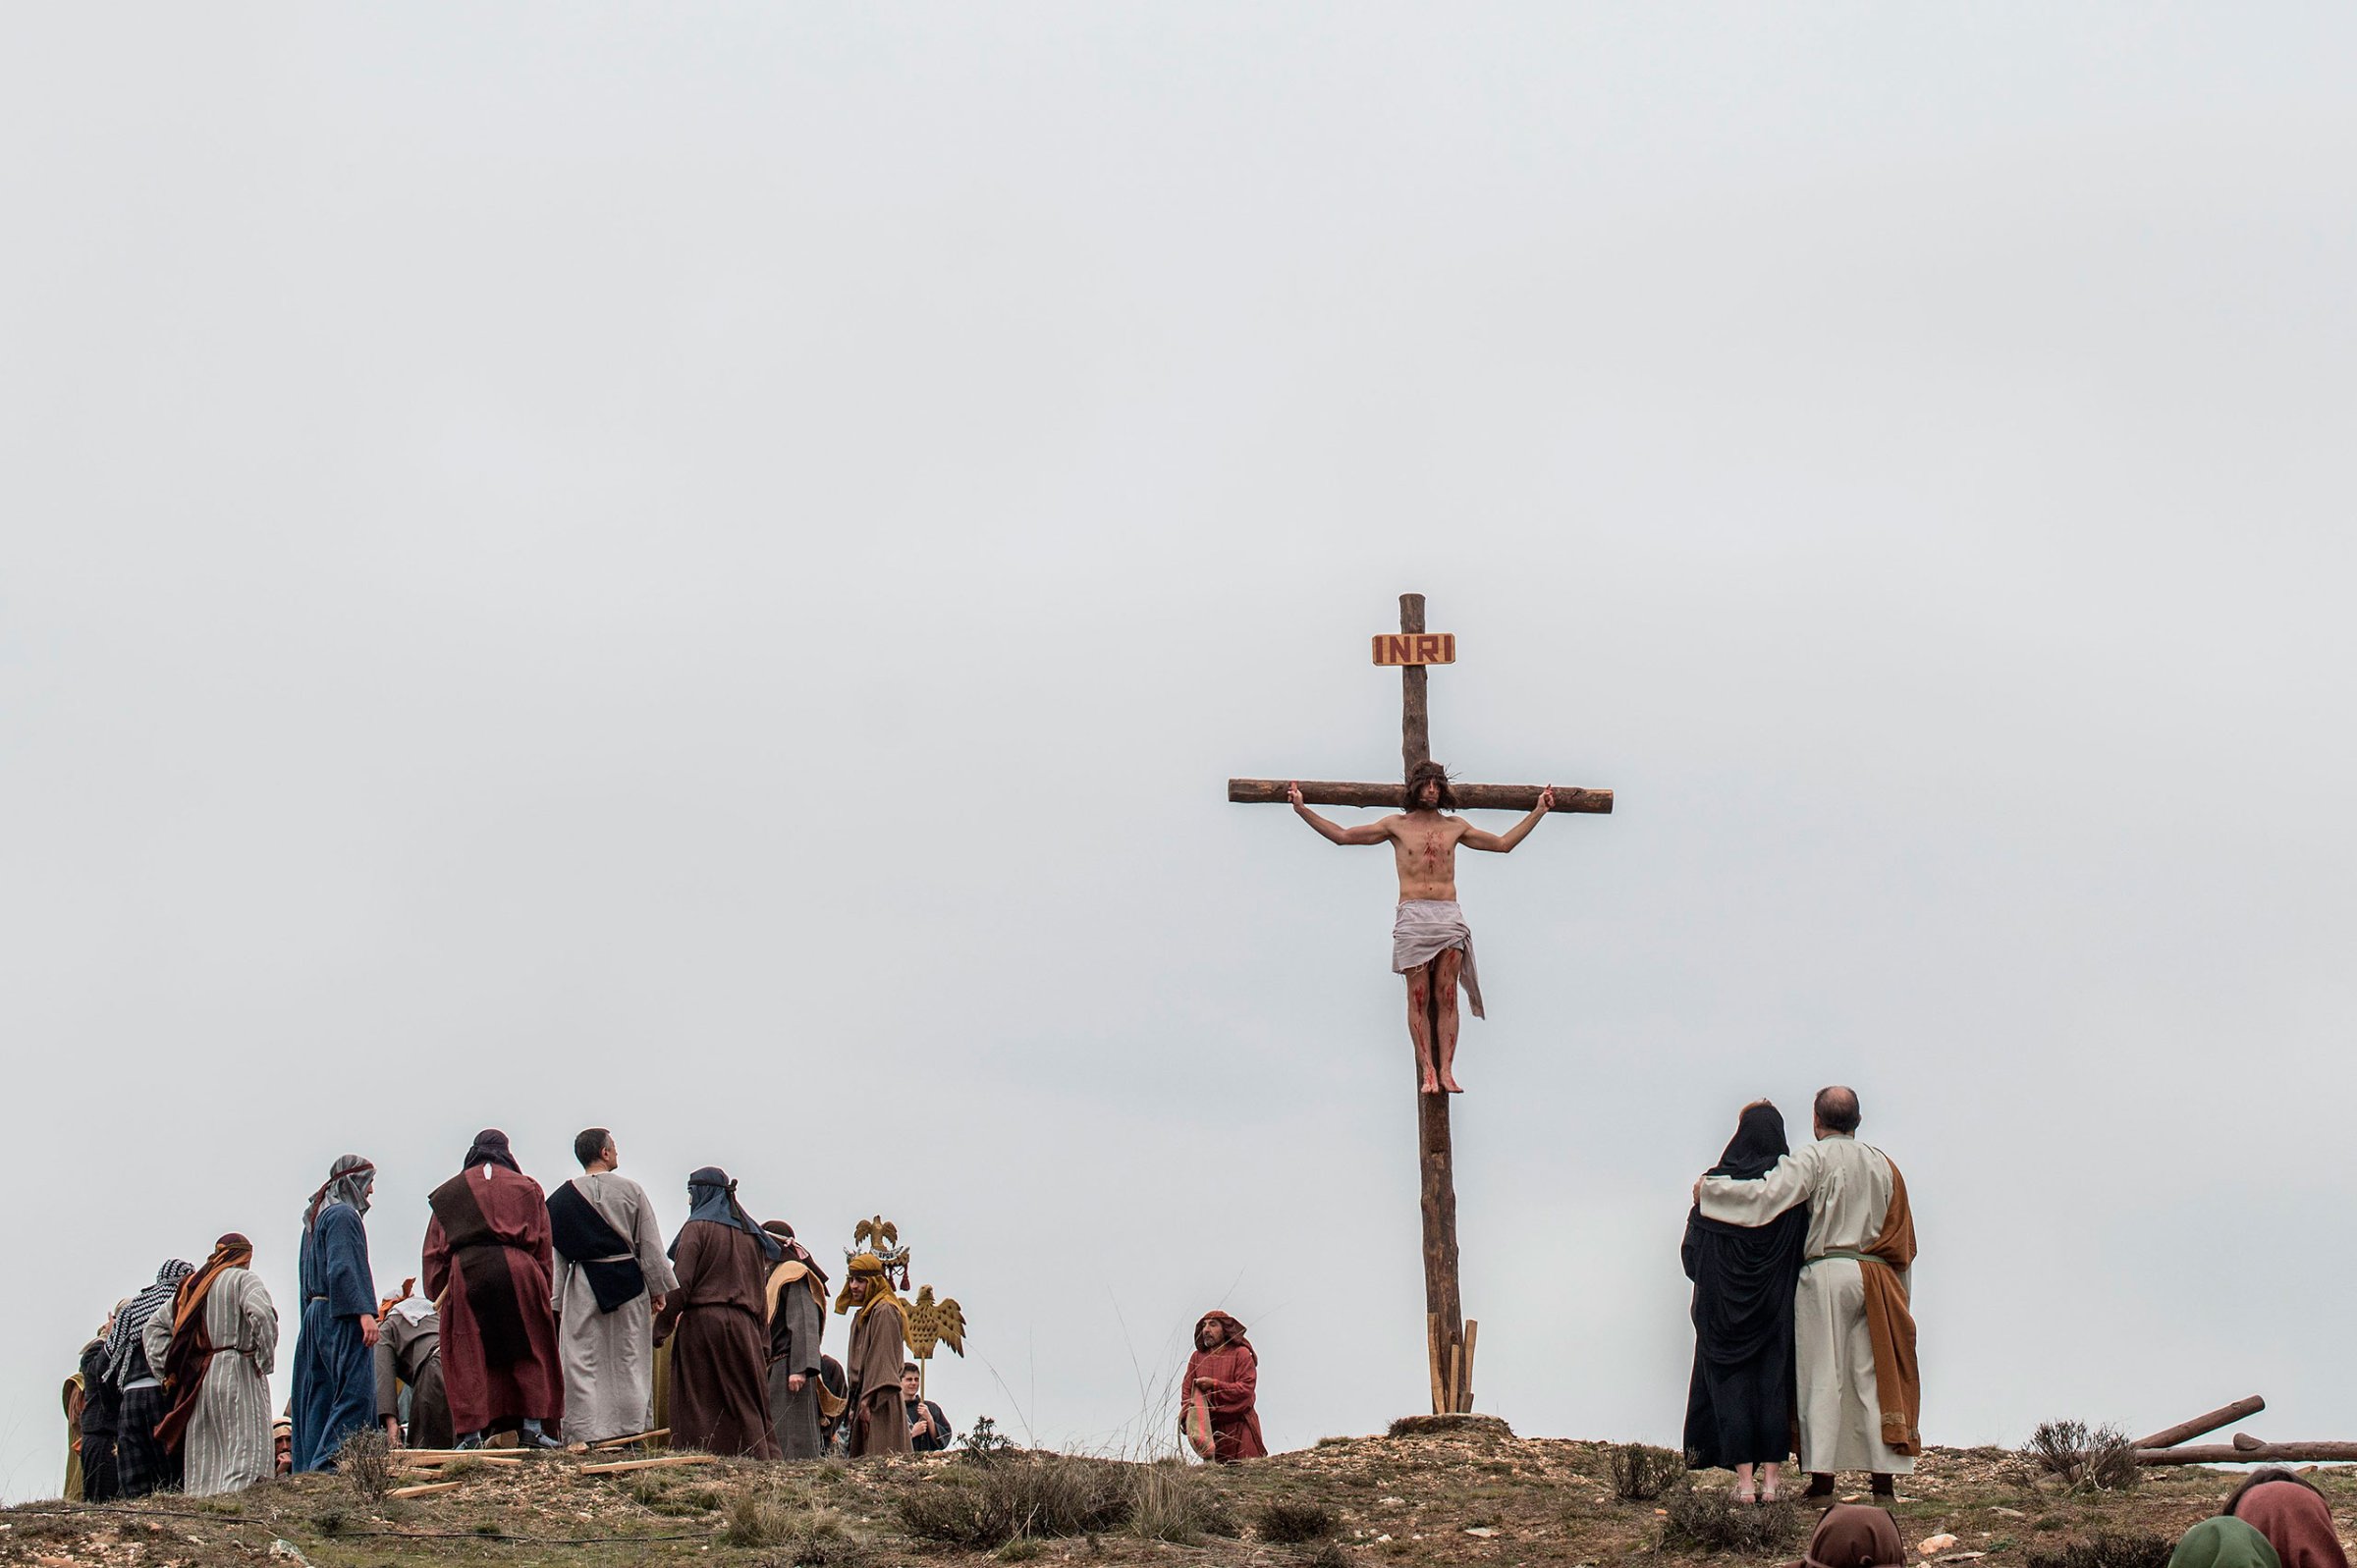 An actor portraying Jesus is crucified as residents dressed in period clothing perform during the reenactment of Christ's suffering, Hiendelaencia, Spain, March 25, 2016.